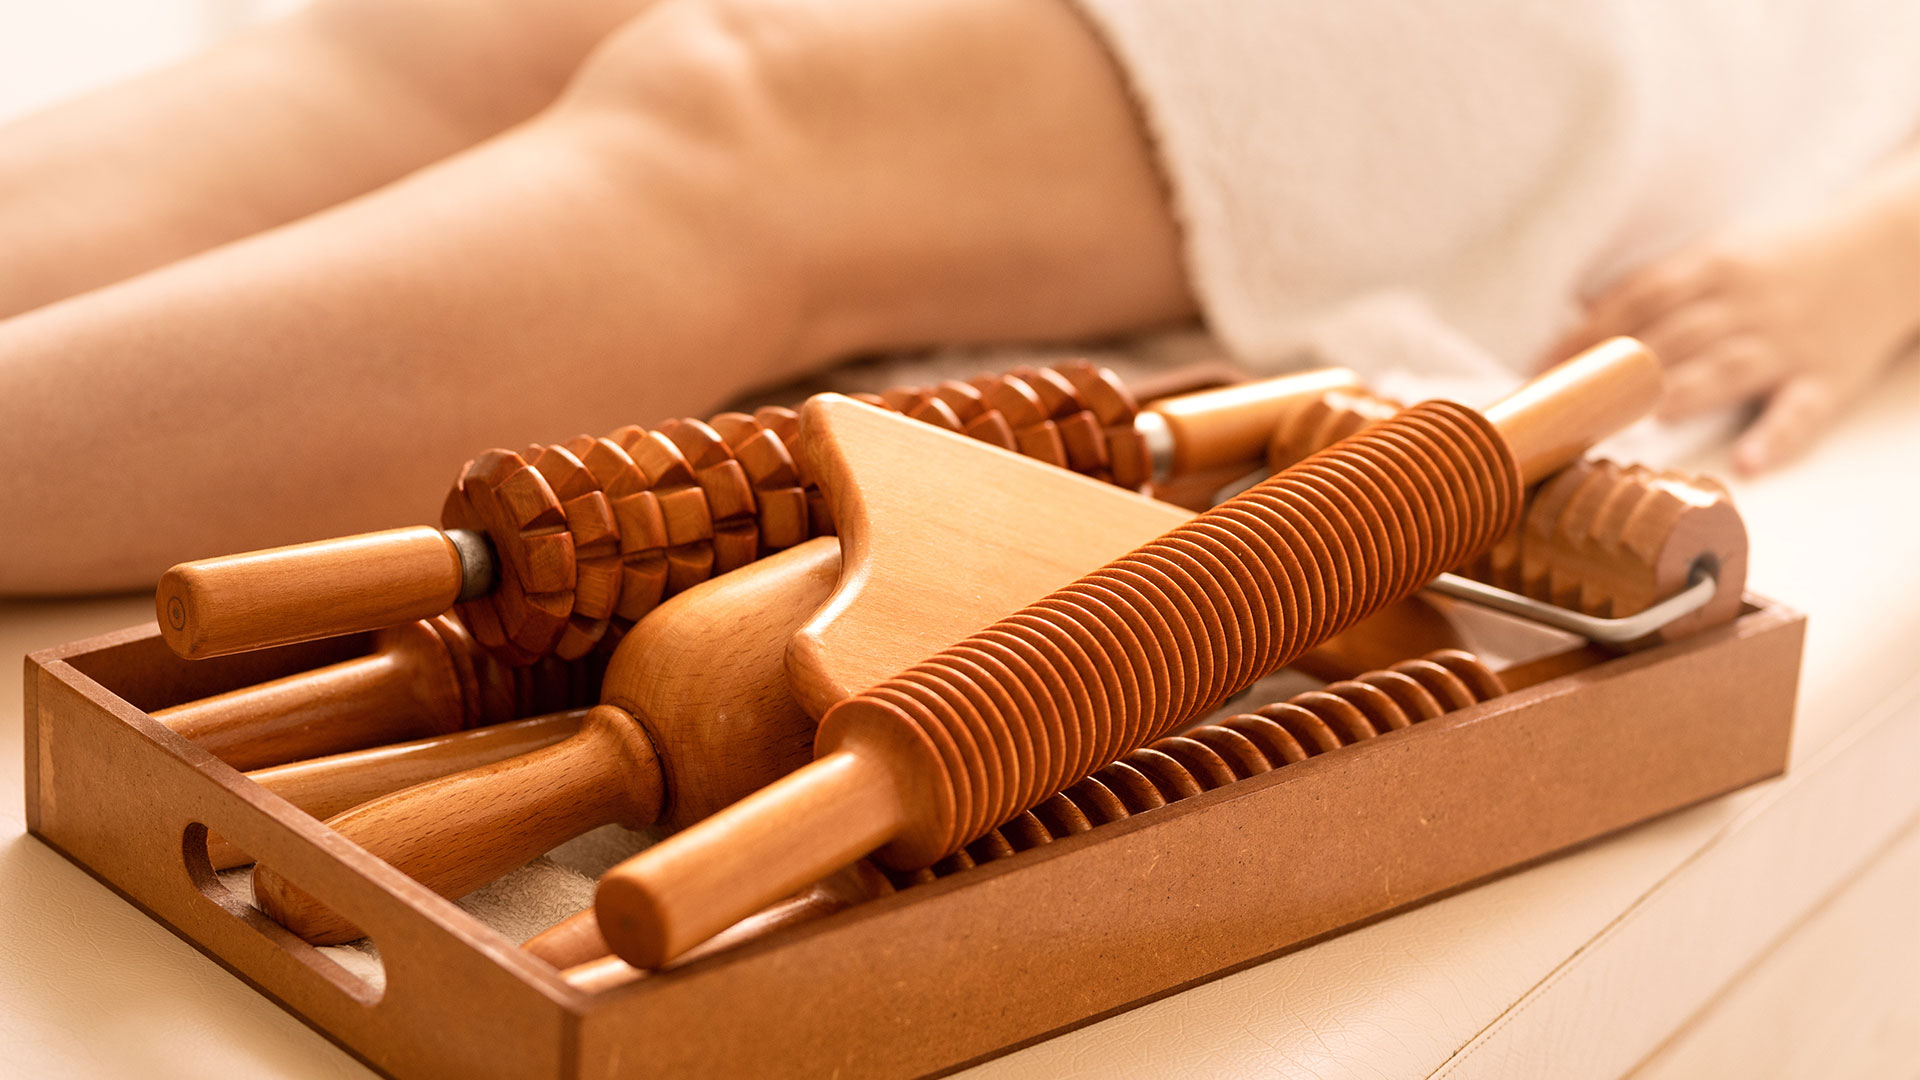 Types Of Tools Used In A Massage Therapy Serenity Sheer Massage